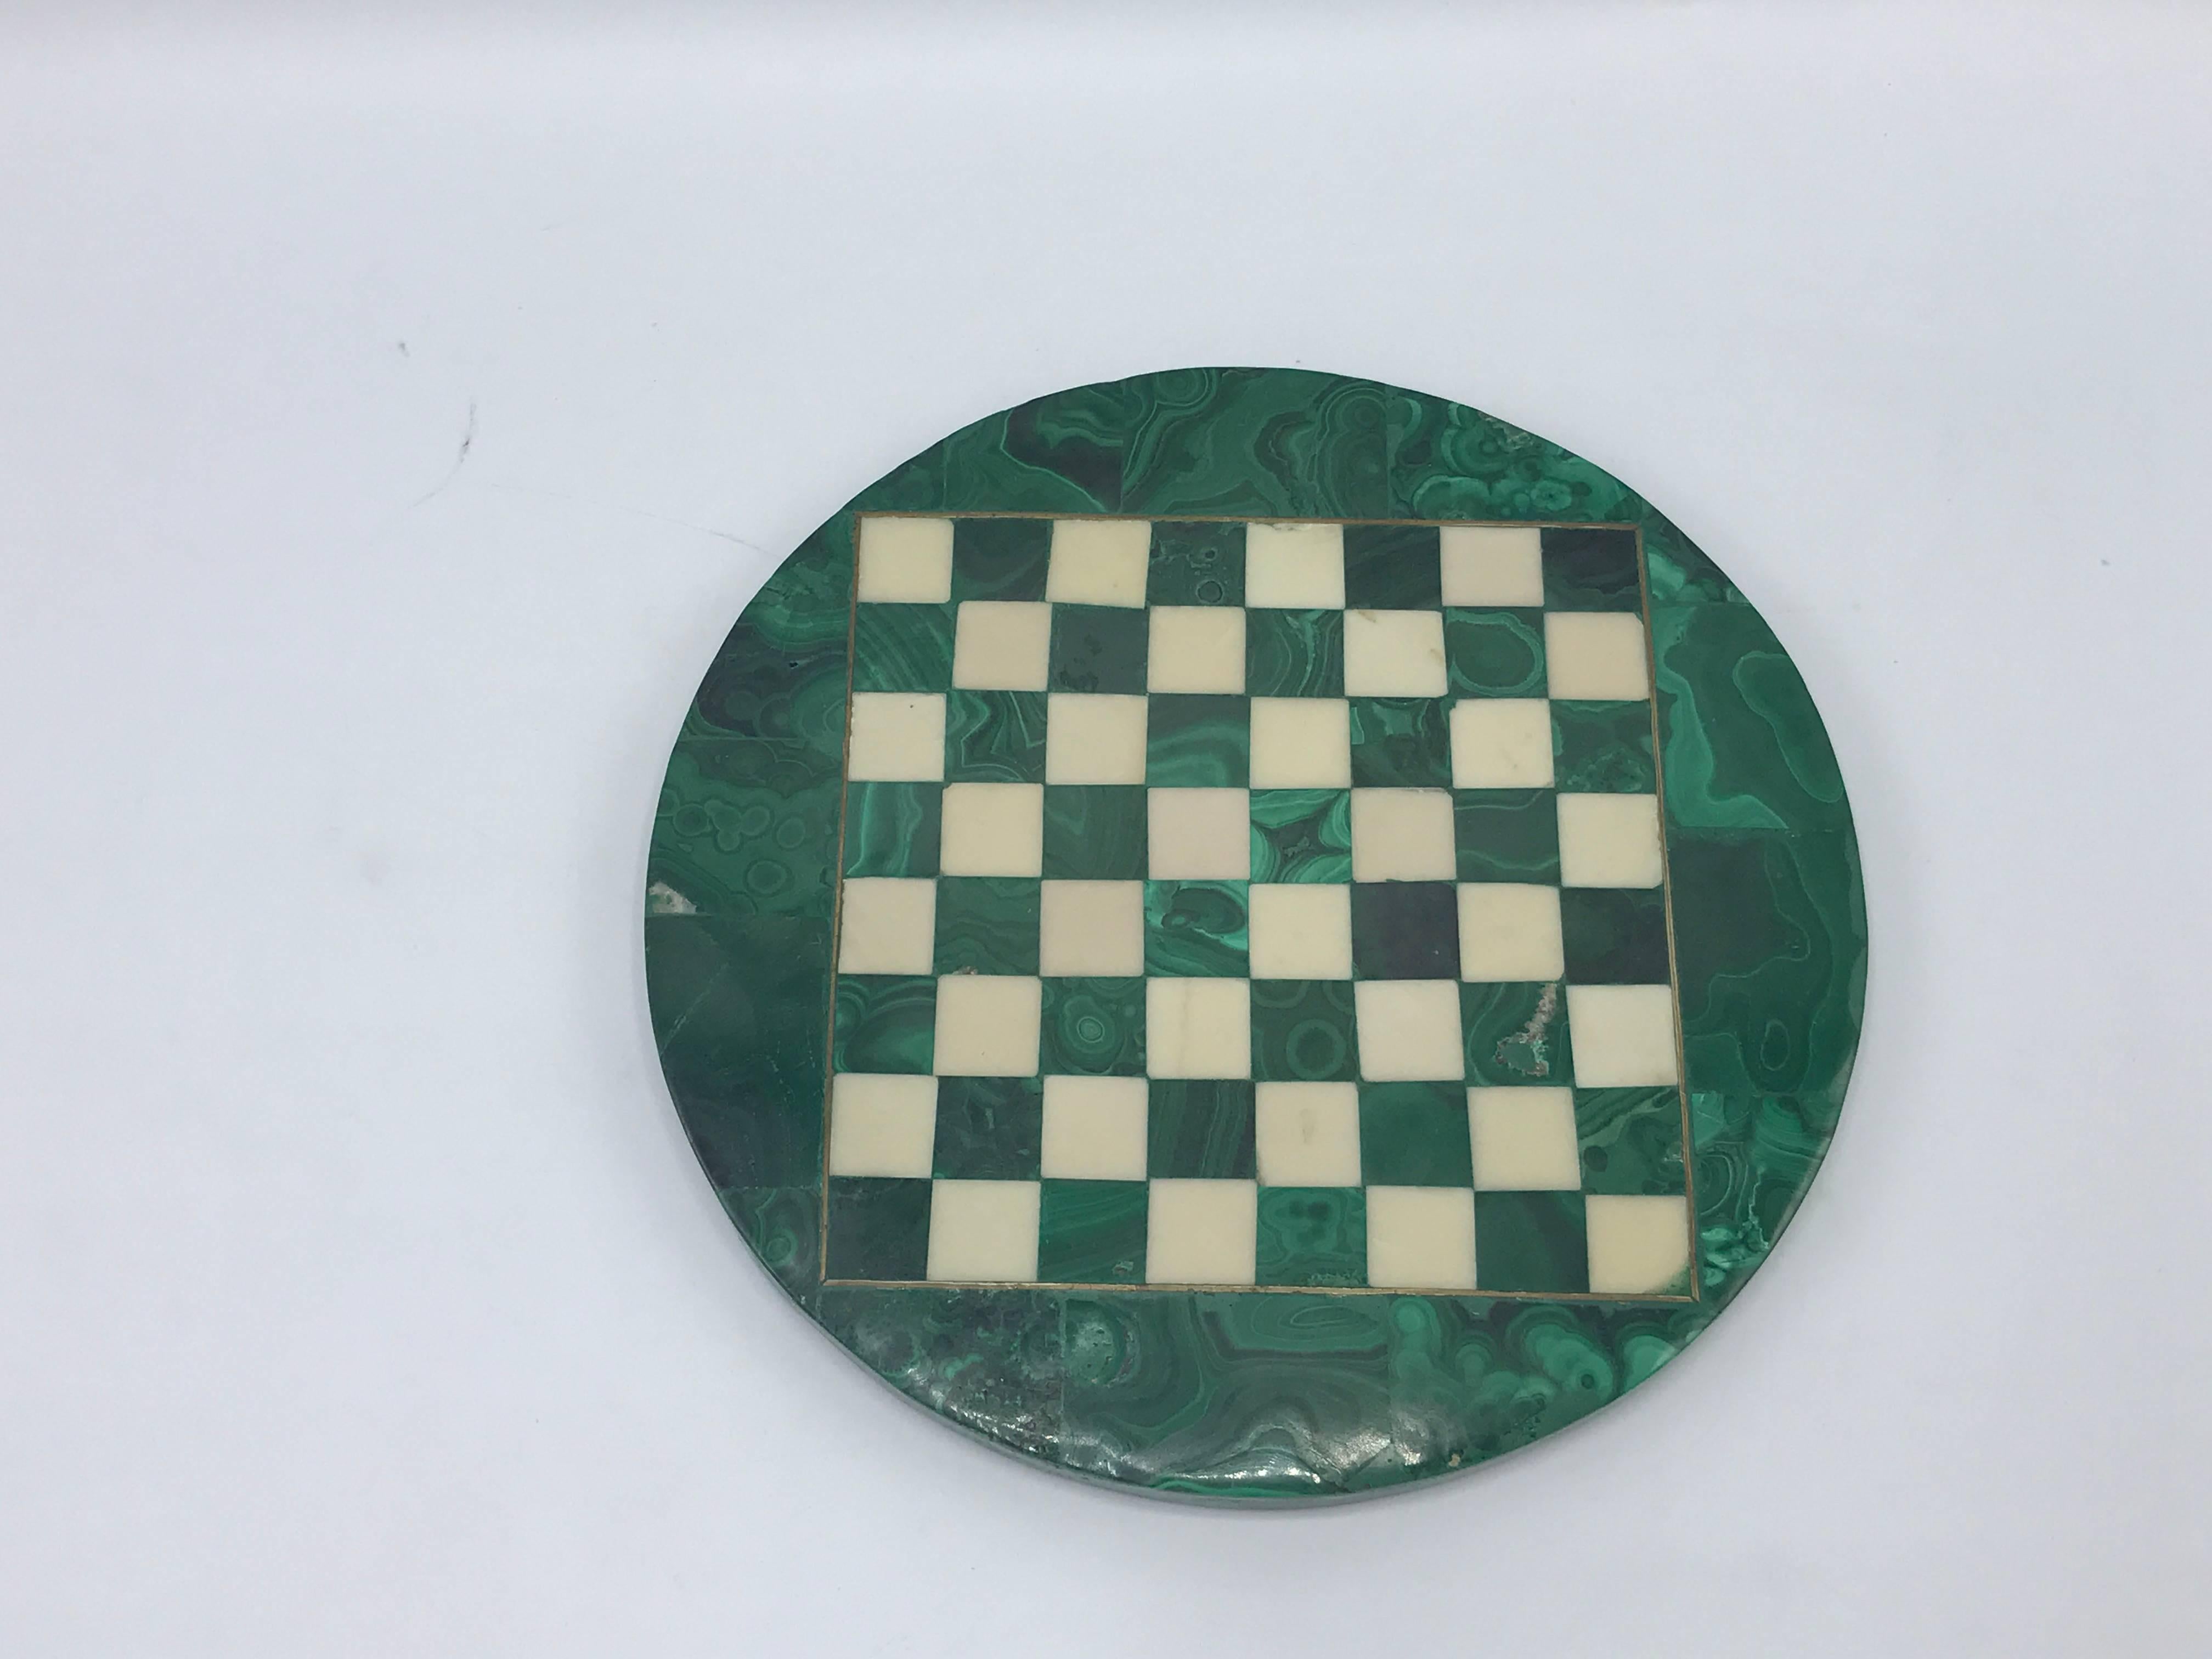 Offered is an immaculate, 1960s, malachite with brass inlay chessboard cheeseboard.